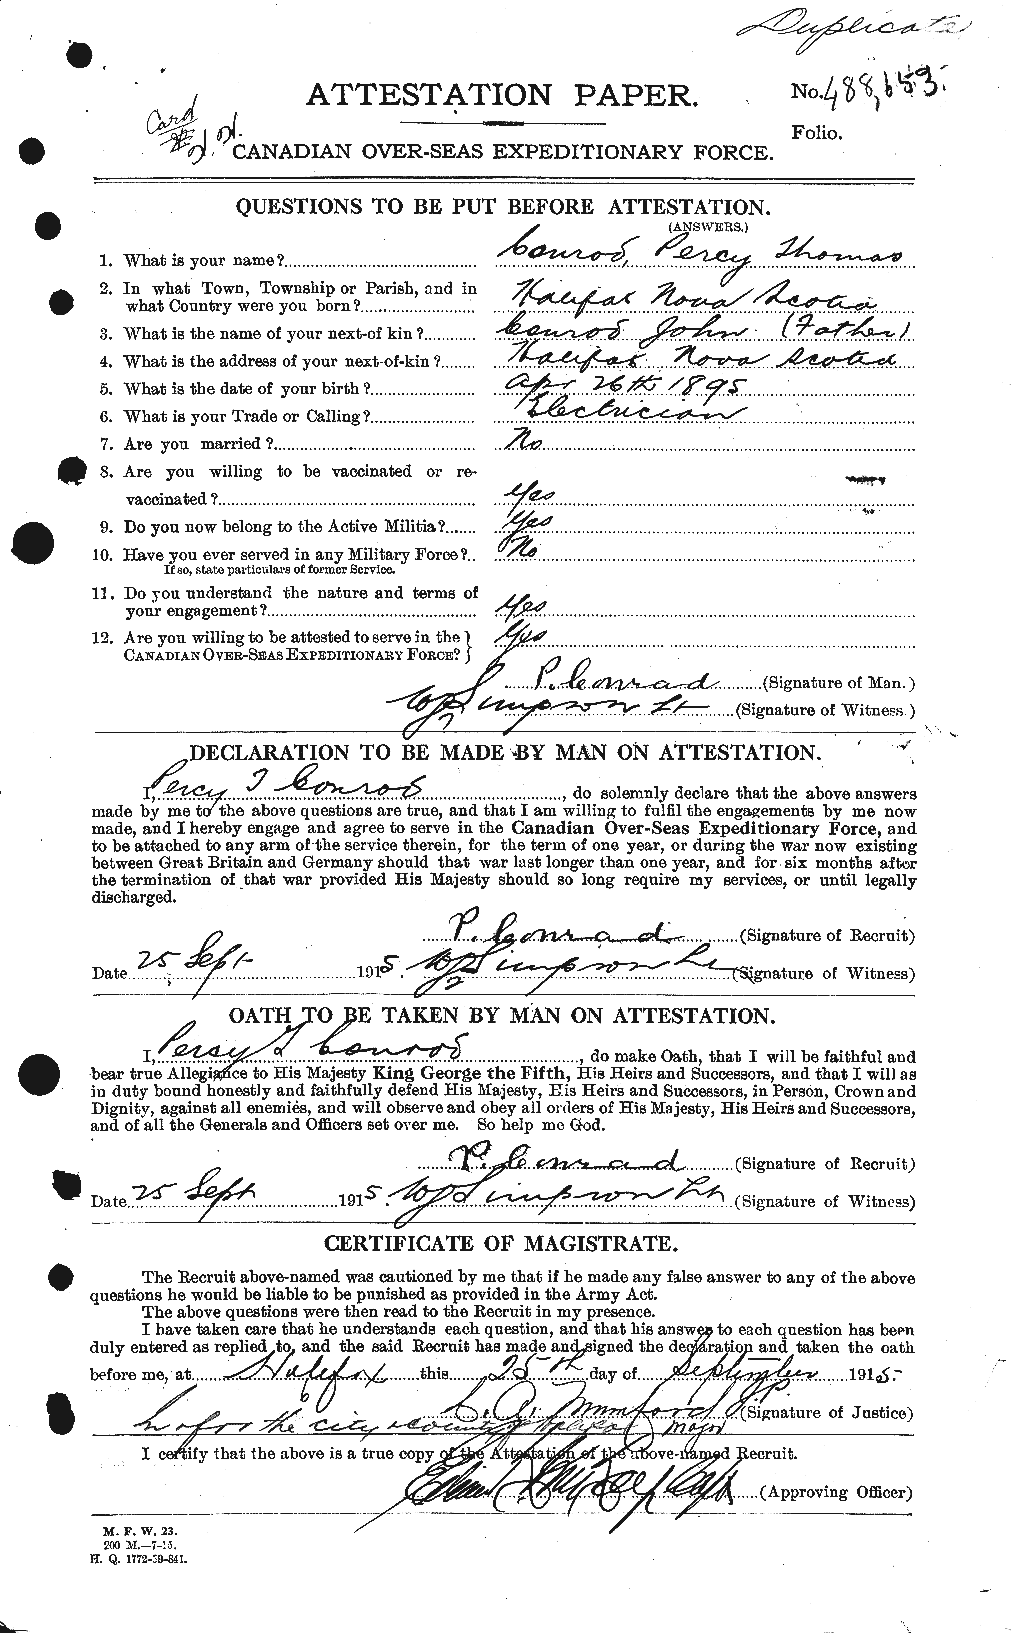 Personnel Records of the First World War - CEF 070814a